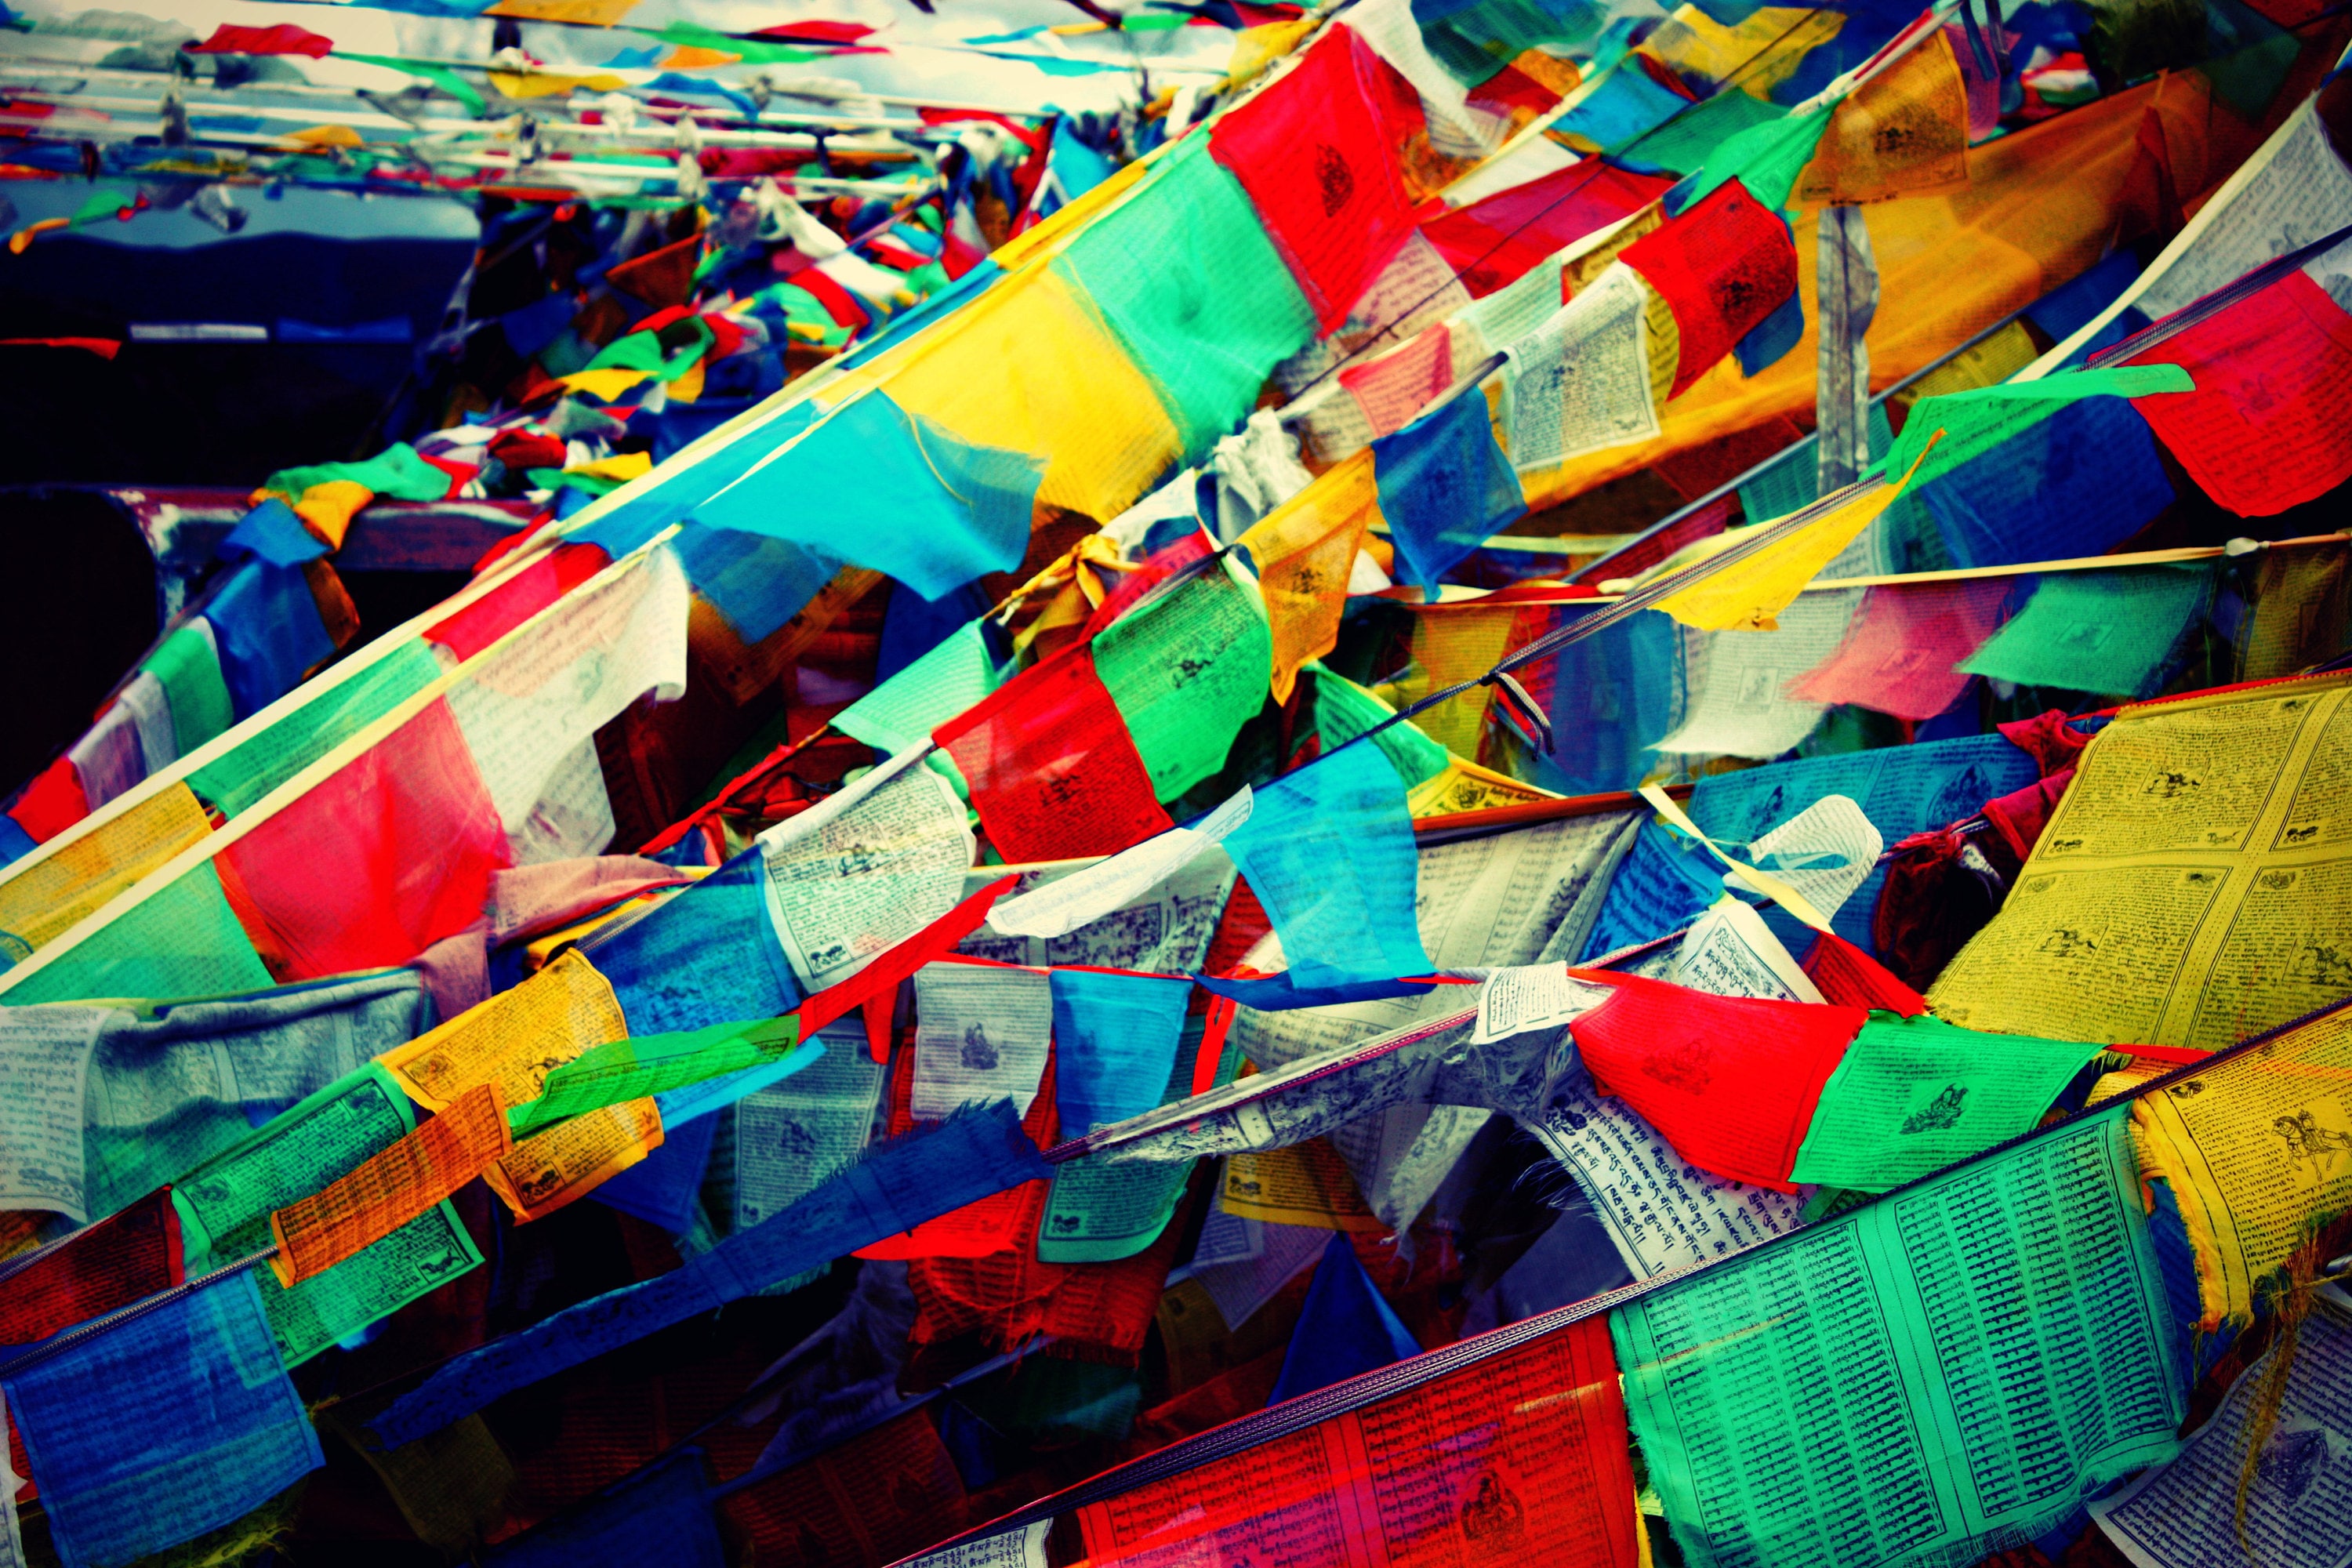 A tangle of colourful prayer flags high up on a pass.